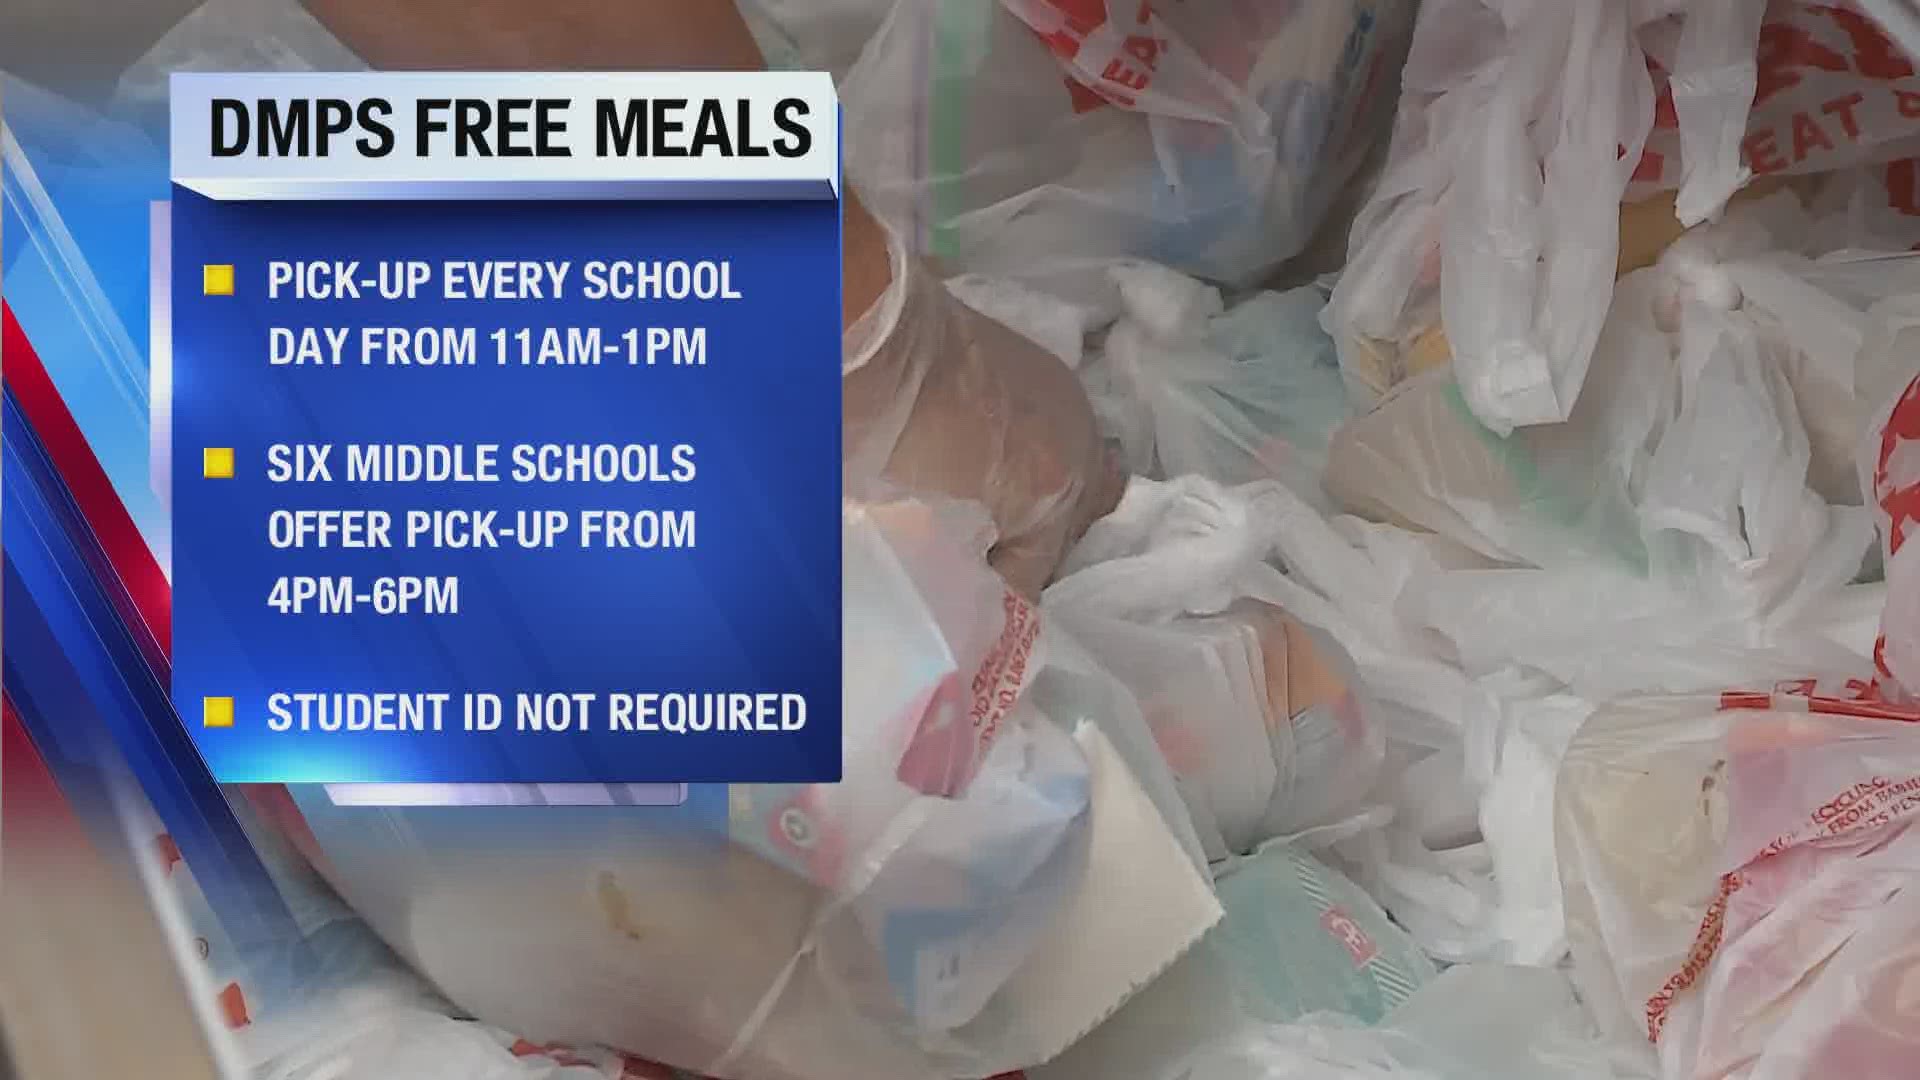 Des Moines Public Schools will be offering free breakfast and lunch every school day for kids in the community.